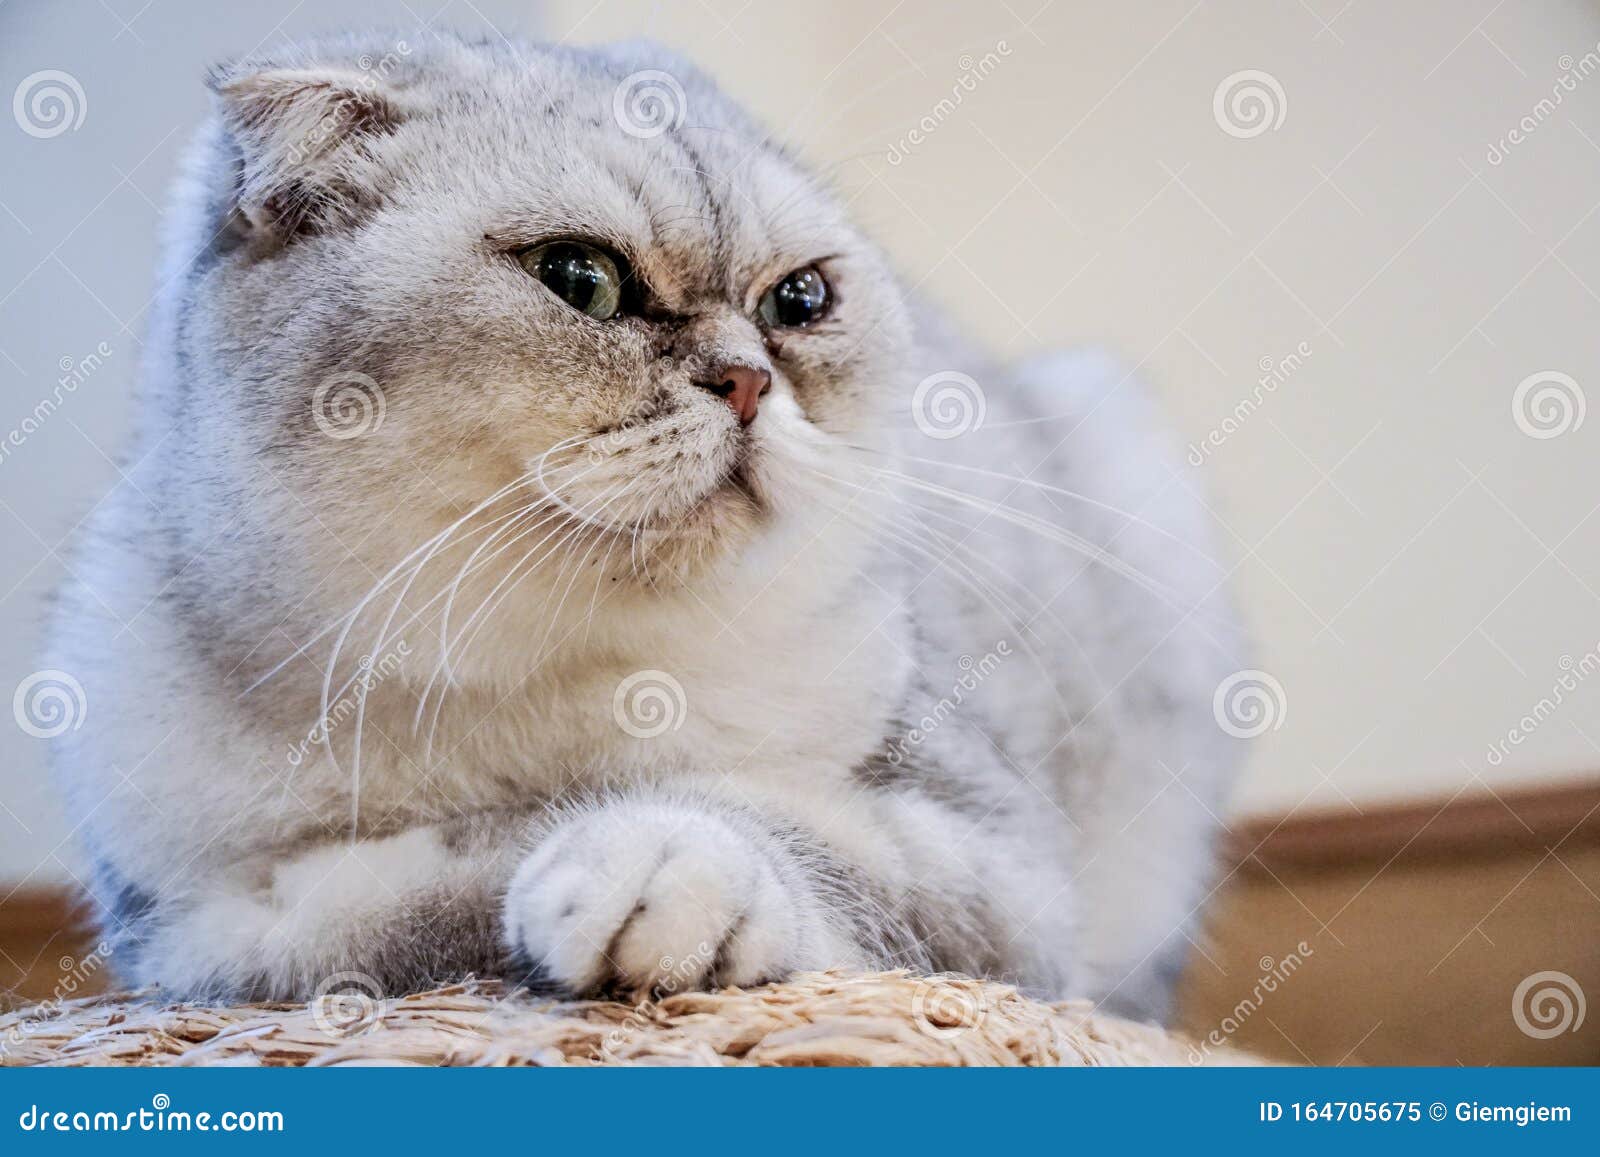 close up exotic shorthair cat is looking this way and wondered something